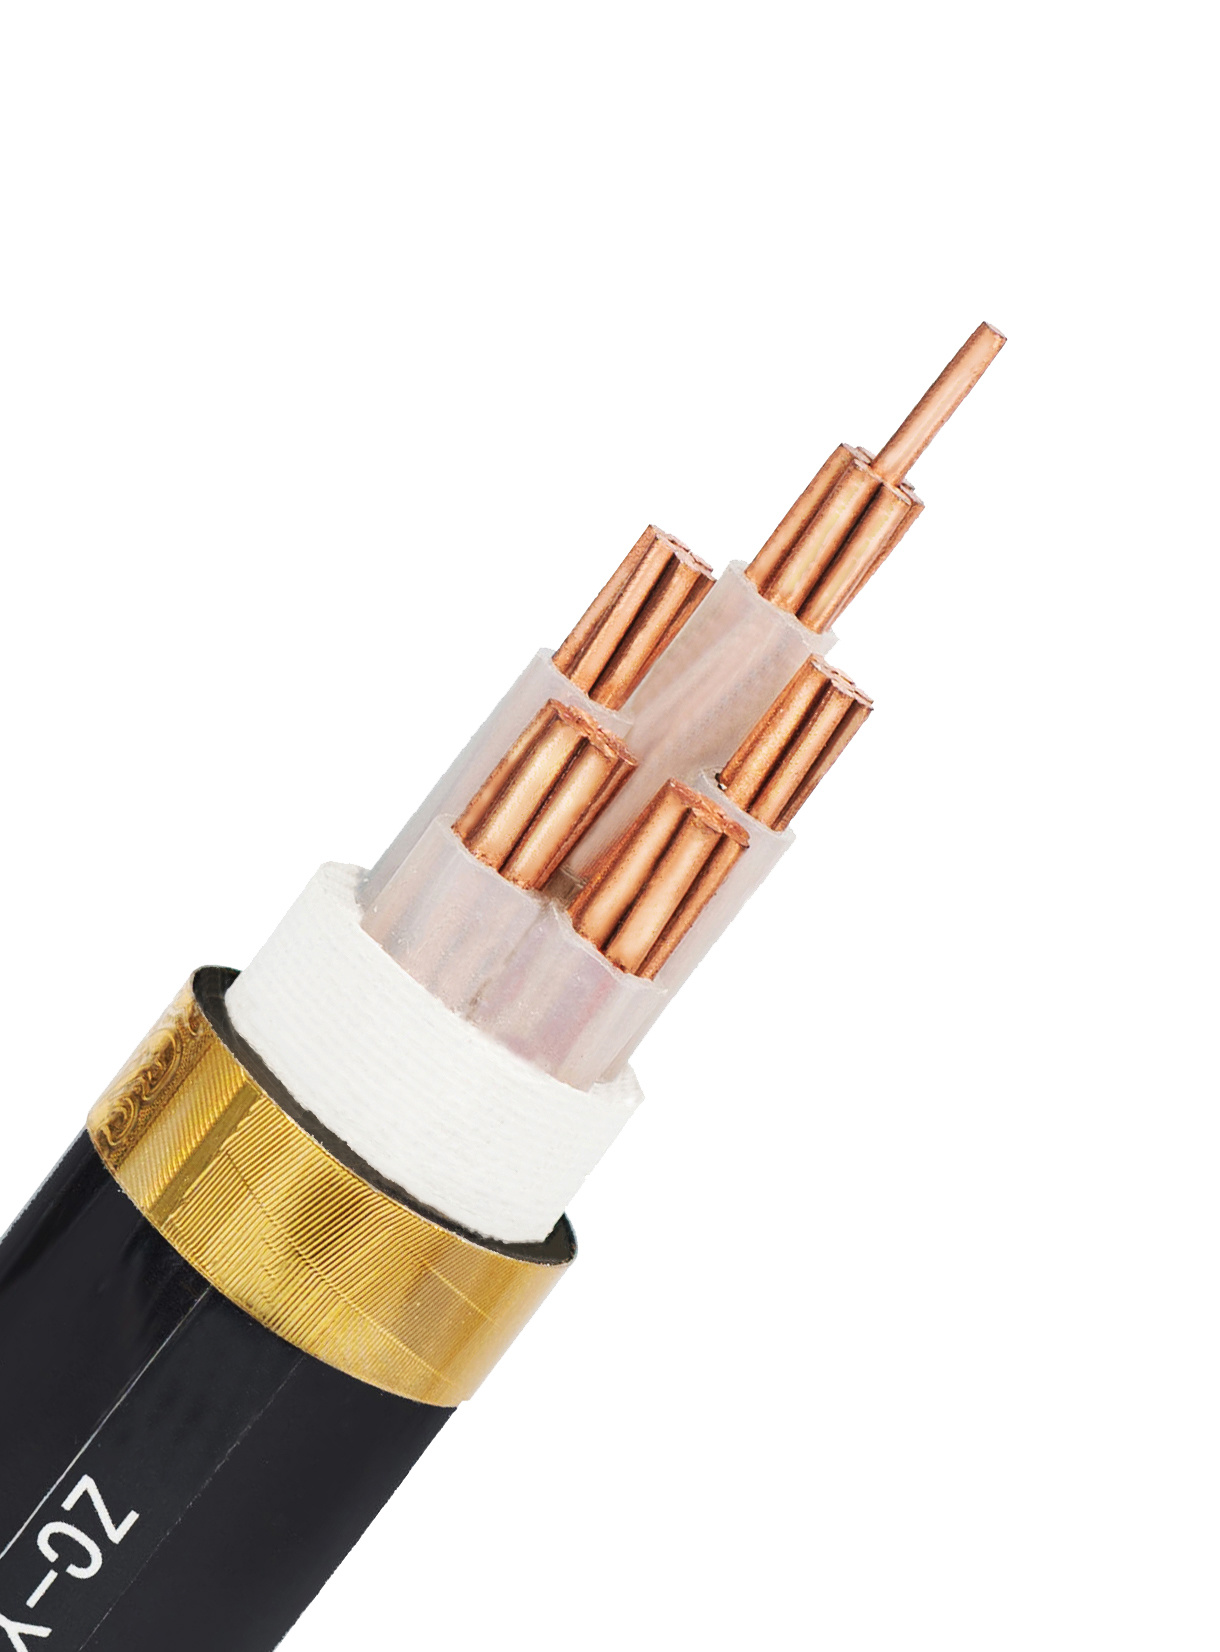 Yjv/Yjv22-0.6/1kv PVC Insulated Armoured Flexible Electric Power Cable IEC 60502 600/1000V 3 Phase 4 Core Low Voltage XLPE Cable Electric Cable Manufacturer